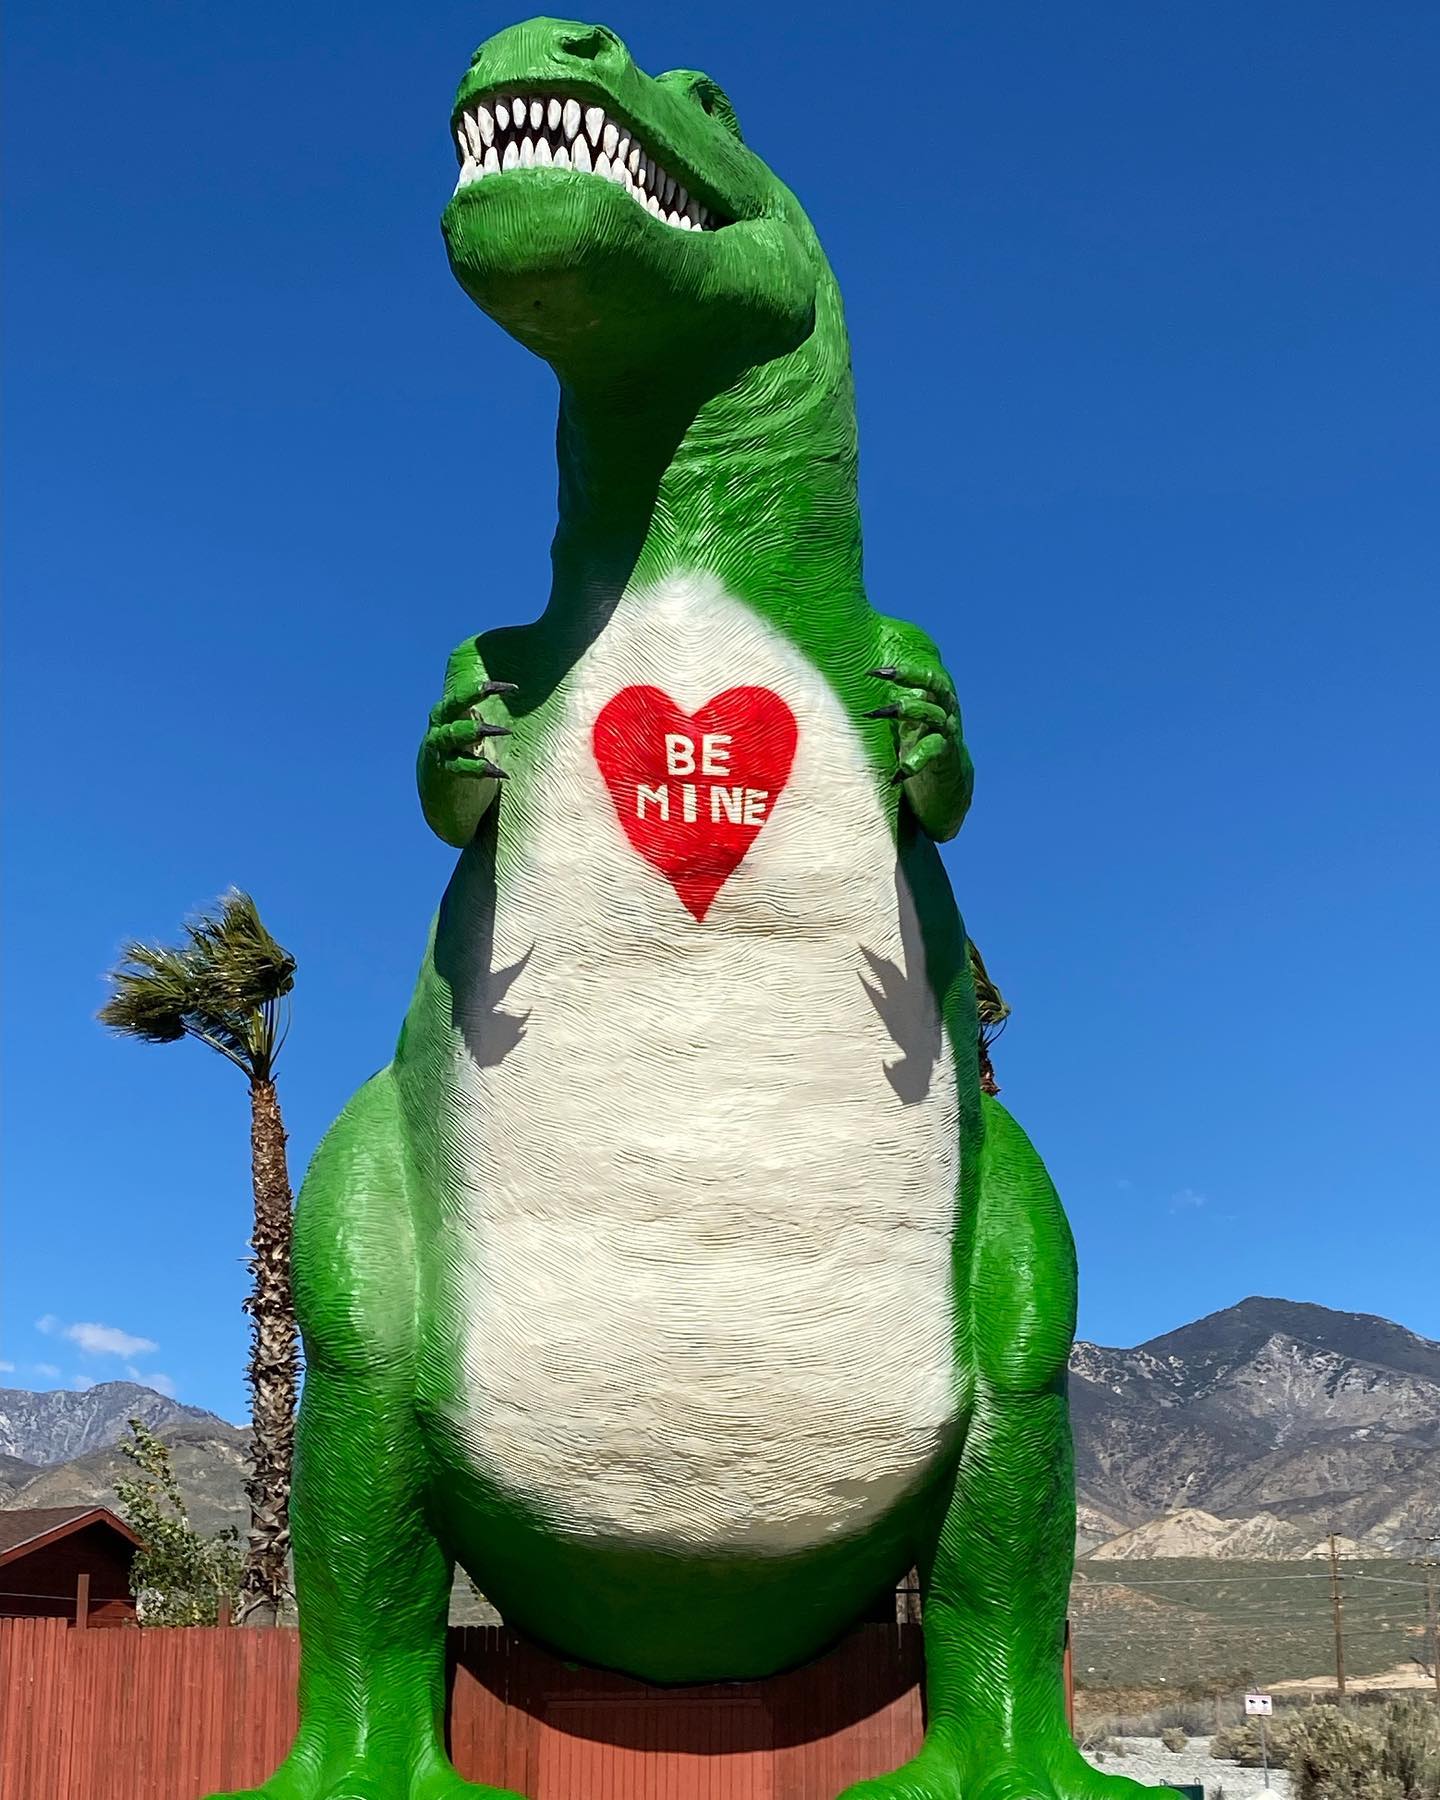 World's Biggest Dinosaurs Sculptures: world record set by the Cabazon Dinosaurs